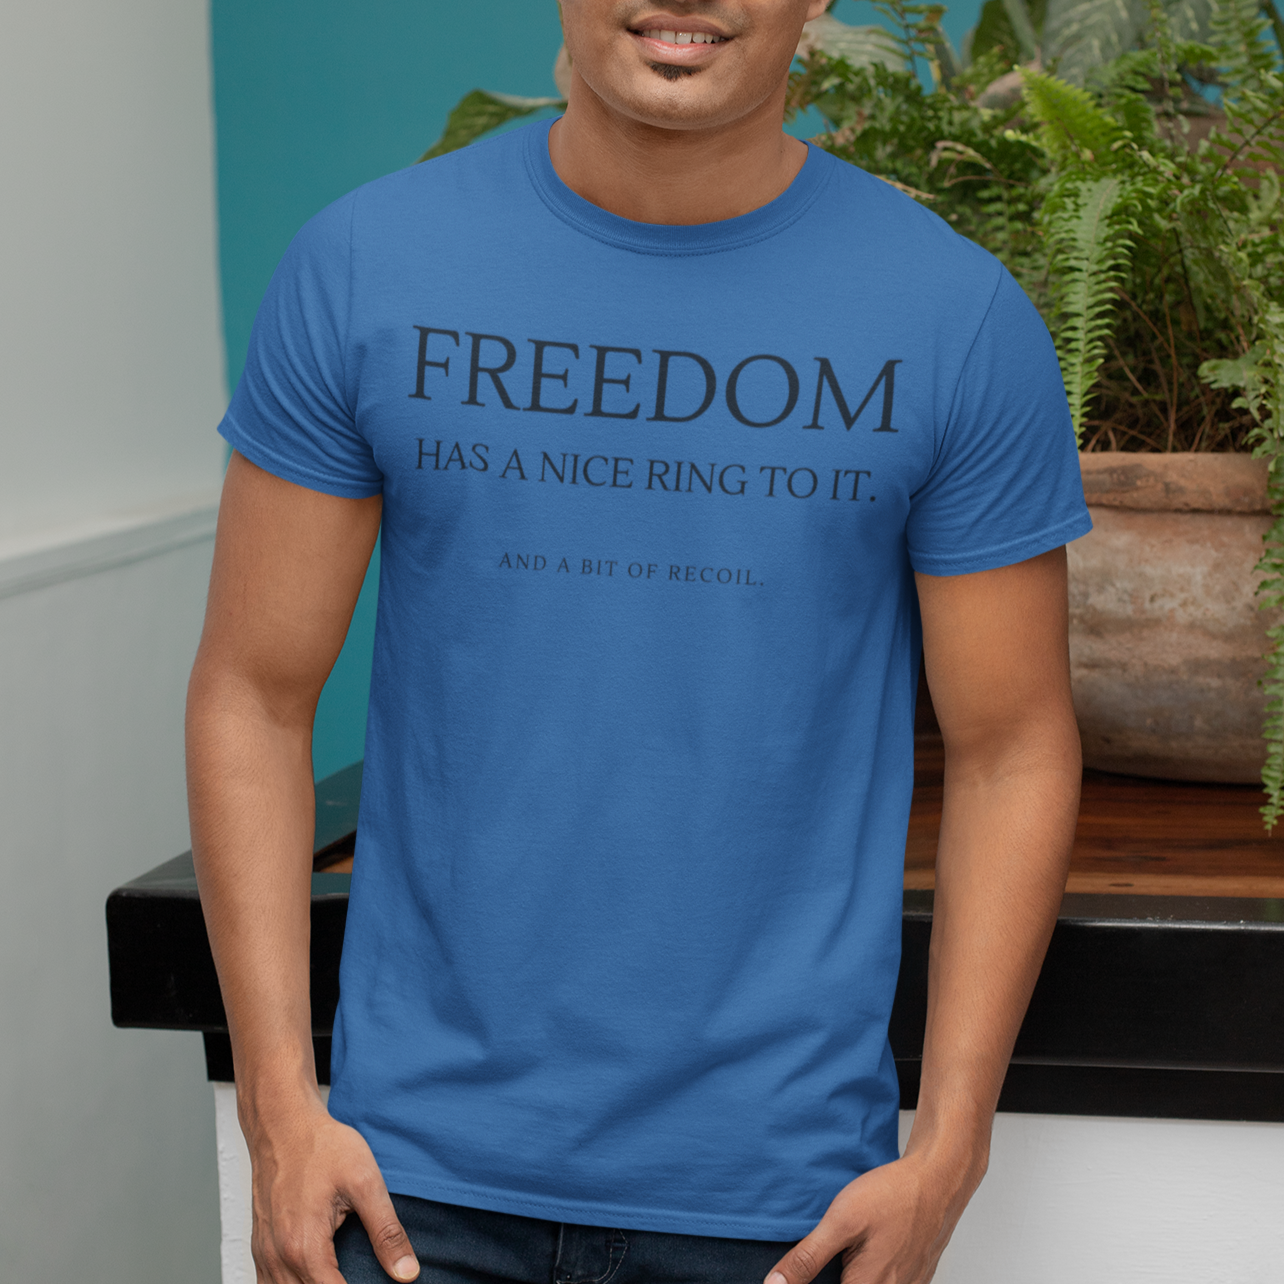 freedom-has-a-nice-ring-to-it-and-a-bit-of-recoil-true-royal-blue-t-shirt-2a-mockup-of-a-man-with-a-tee-posing-next-to-a-plant